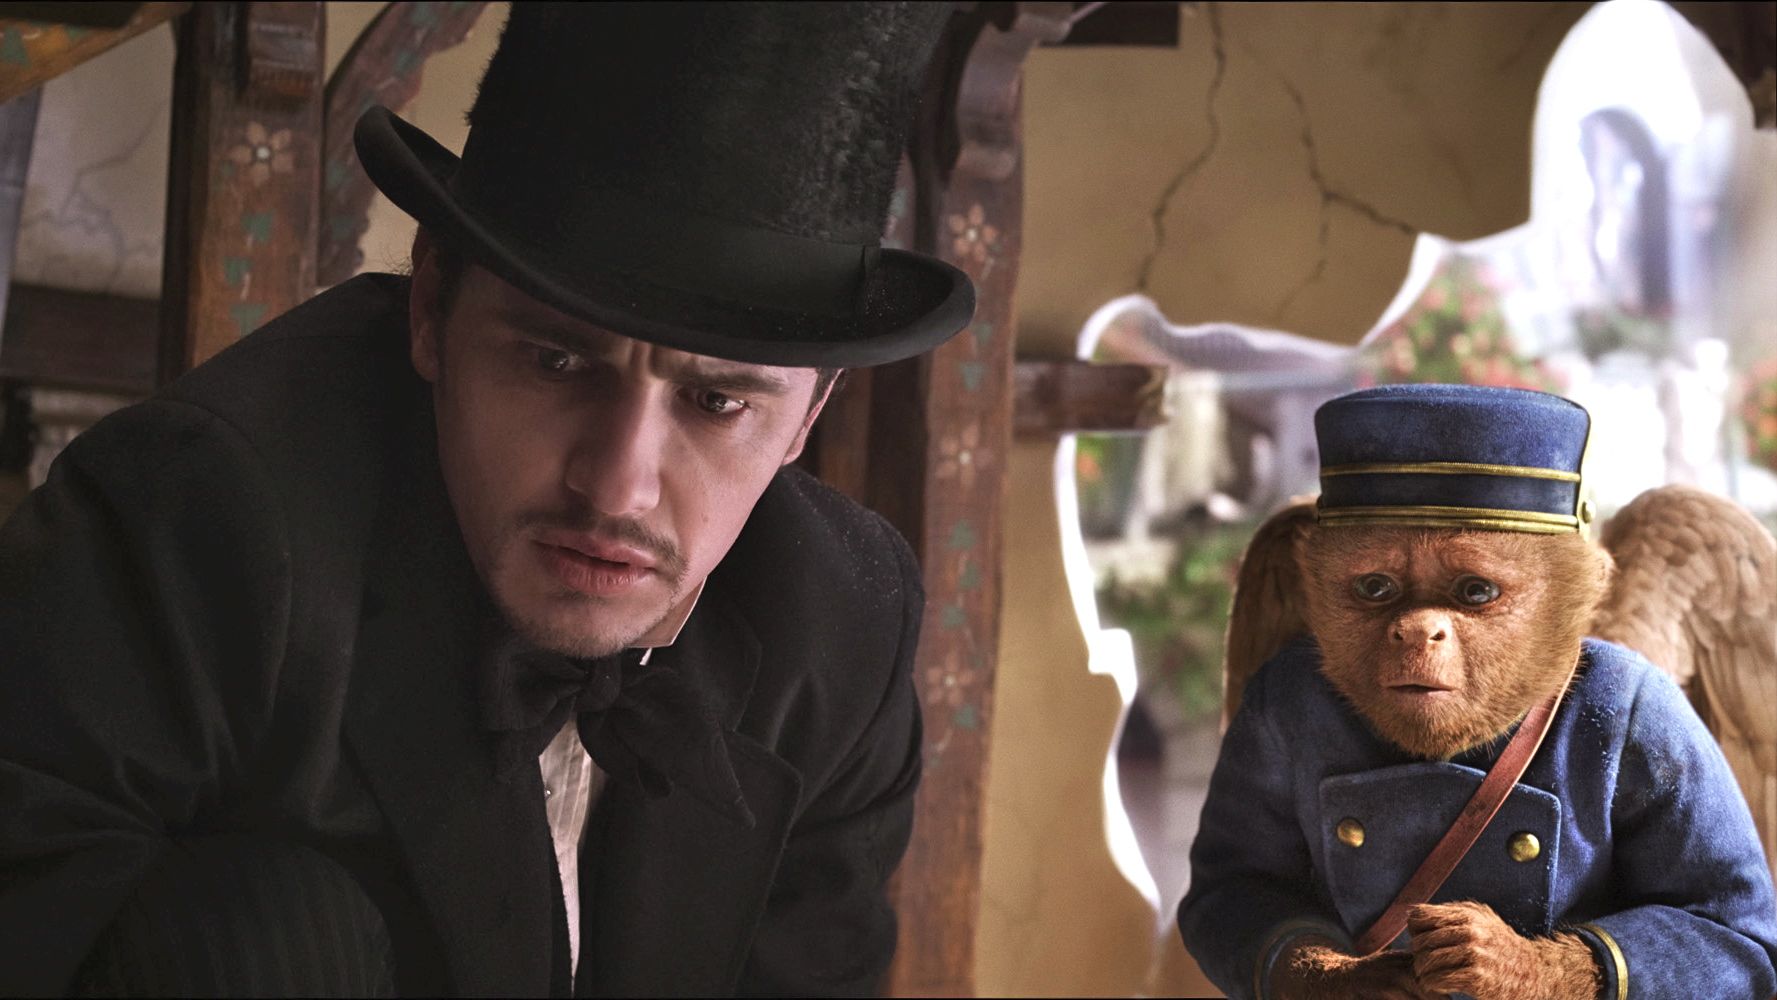 James Franco plays the great, magnetic wizard